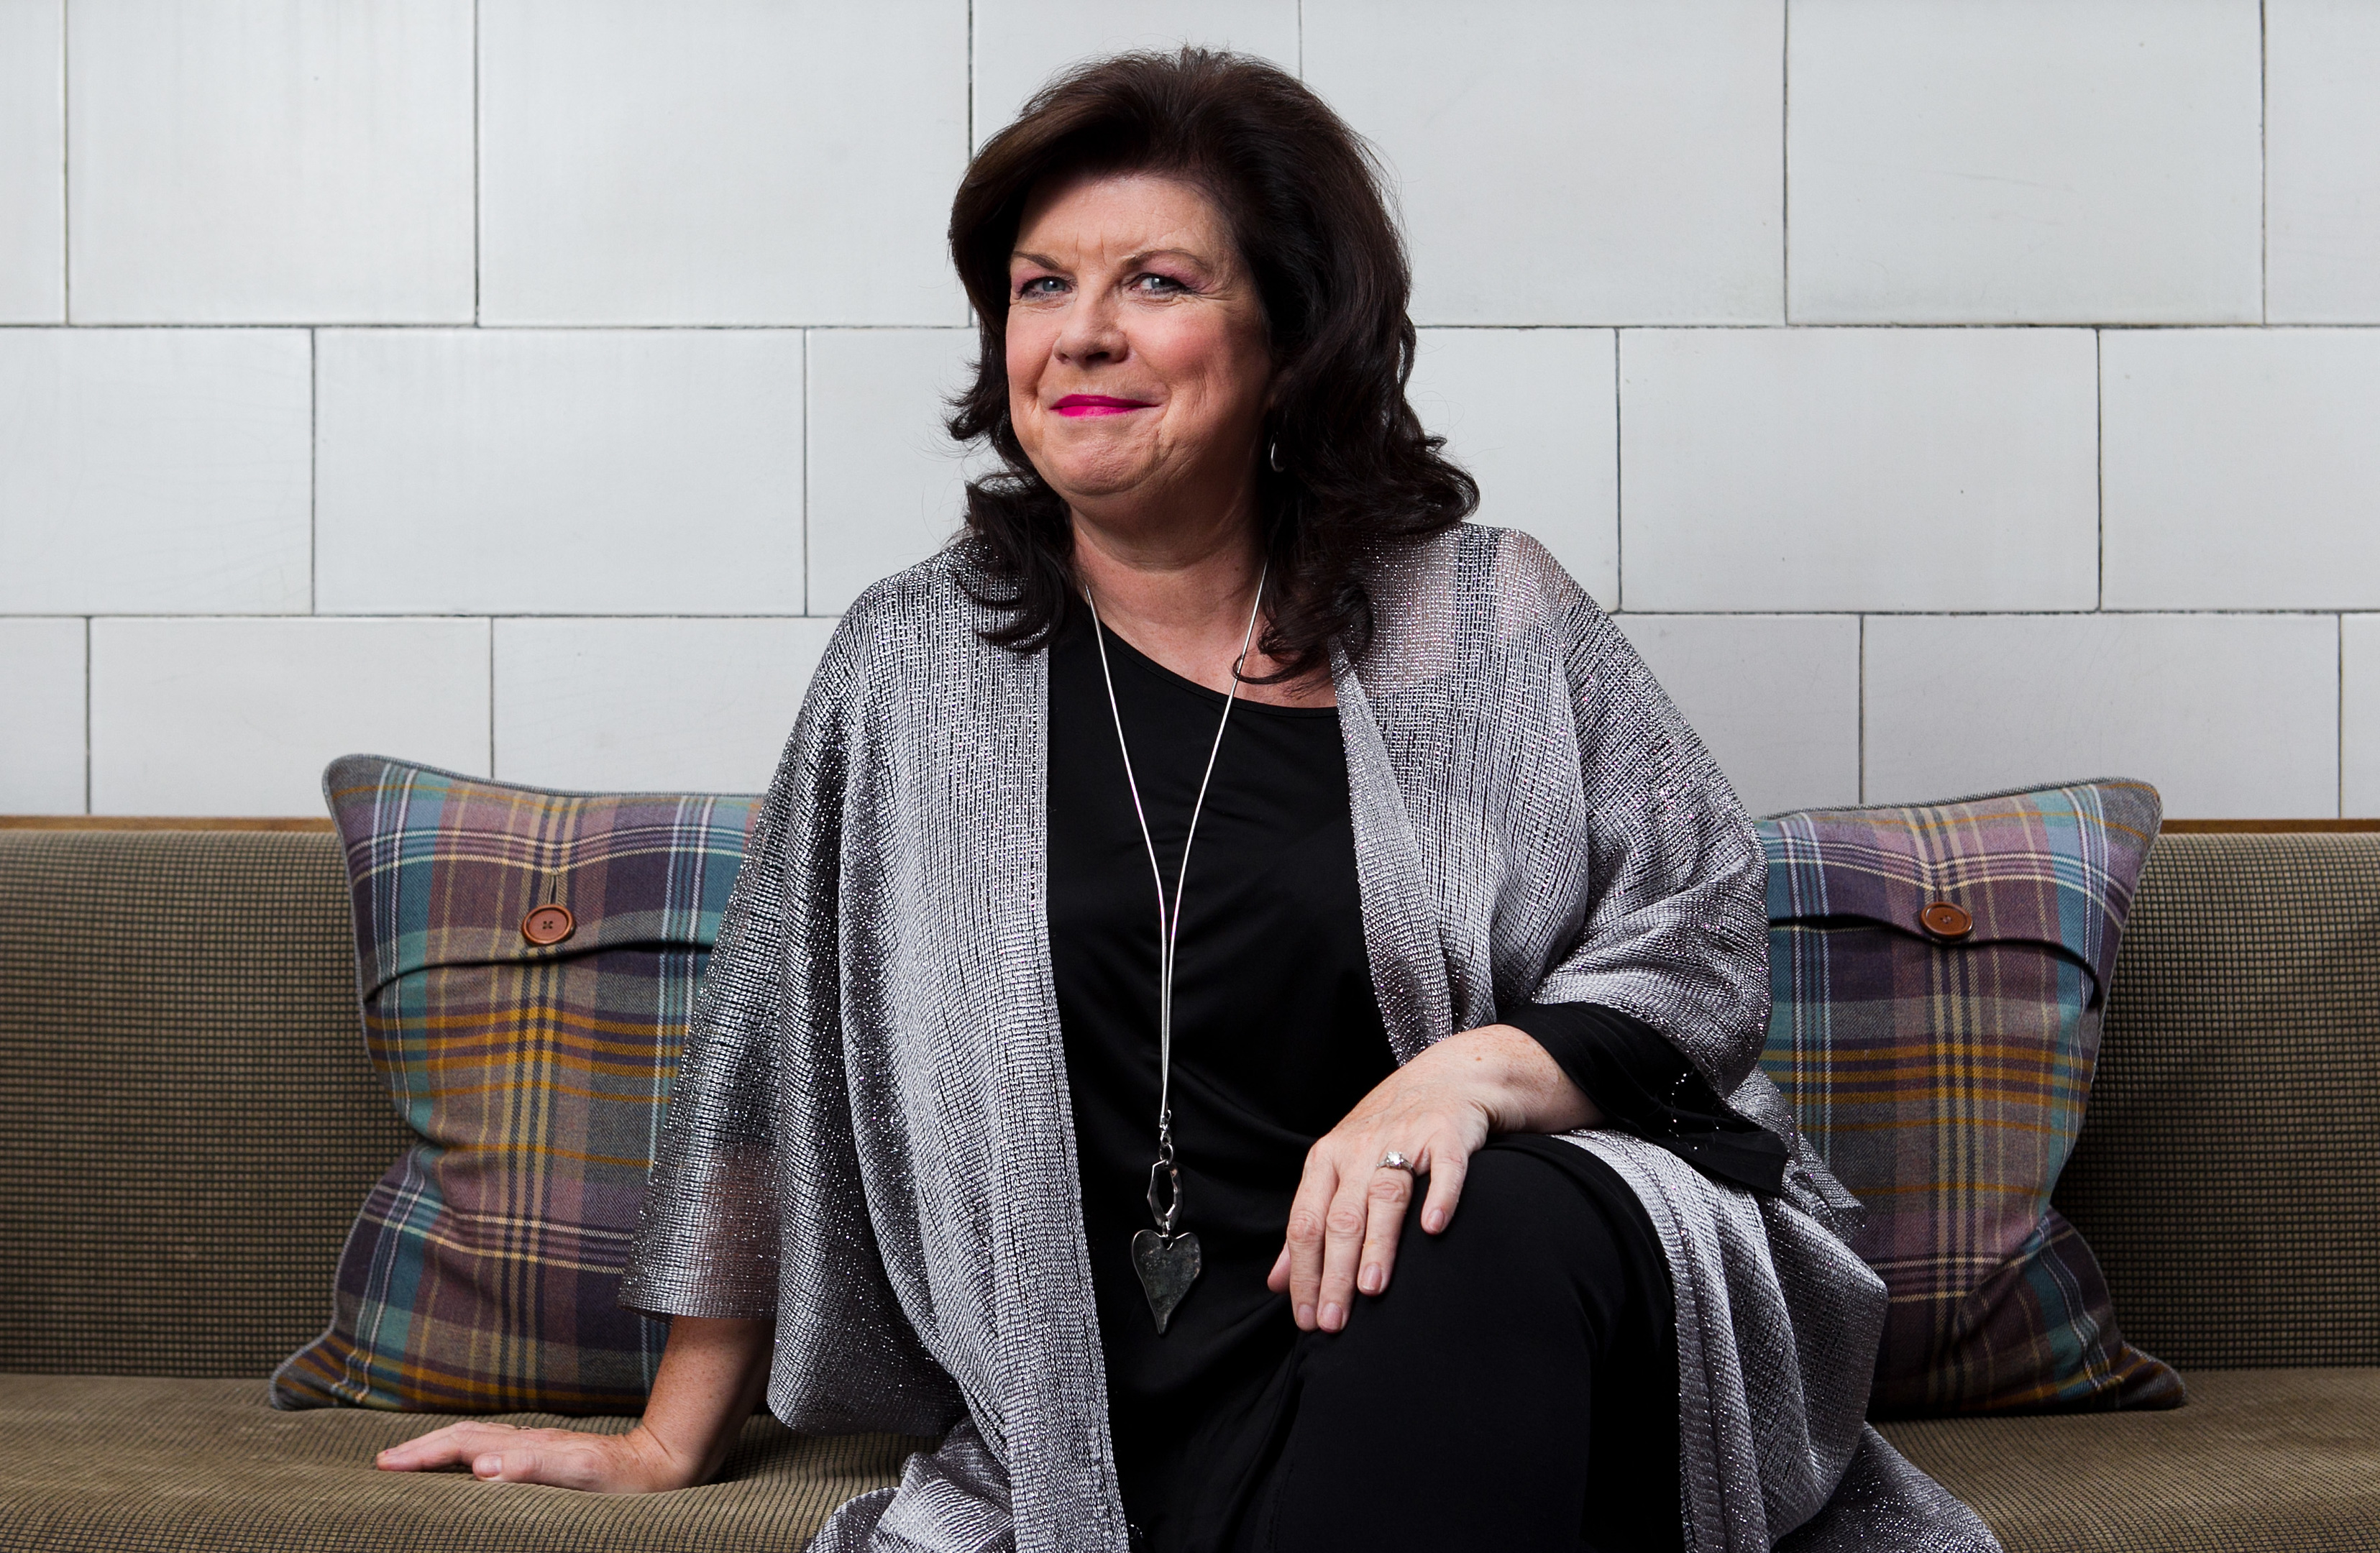 Elaine C Smith, who is promoting her BBC comedy tv show, Two Doors Down (Andrew Cawley/Sunday Post)